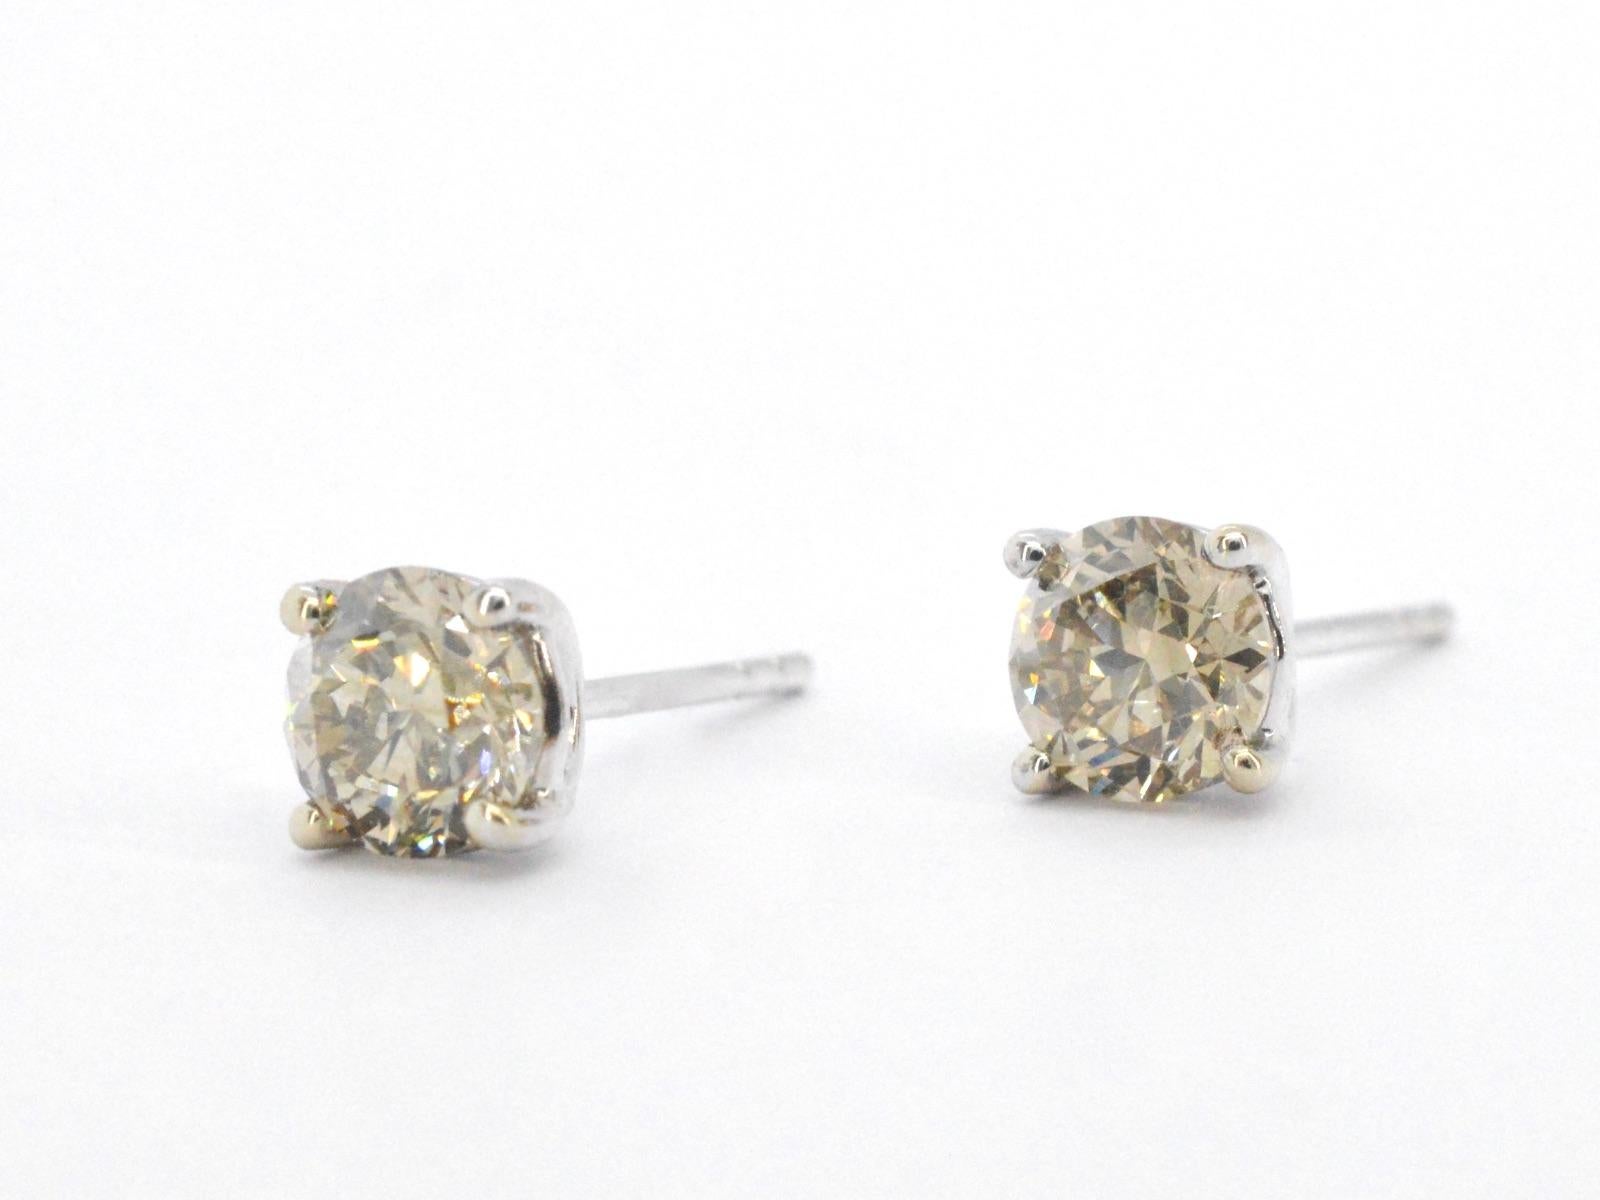 Gold Solitaire Earrings with Champagne Diamond 1